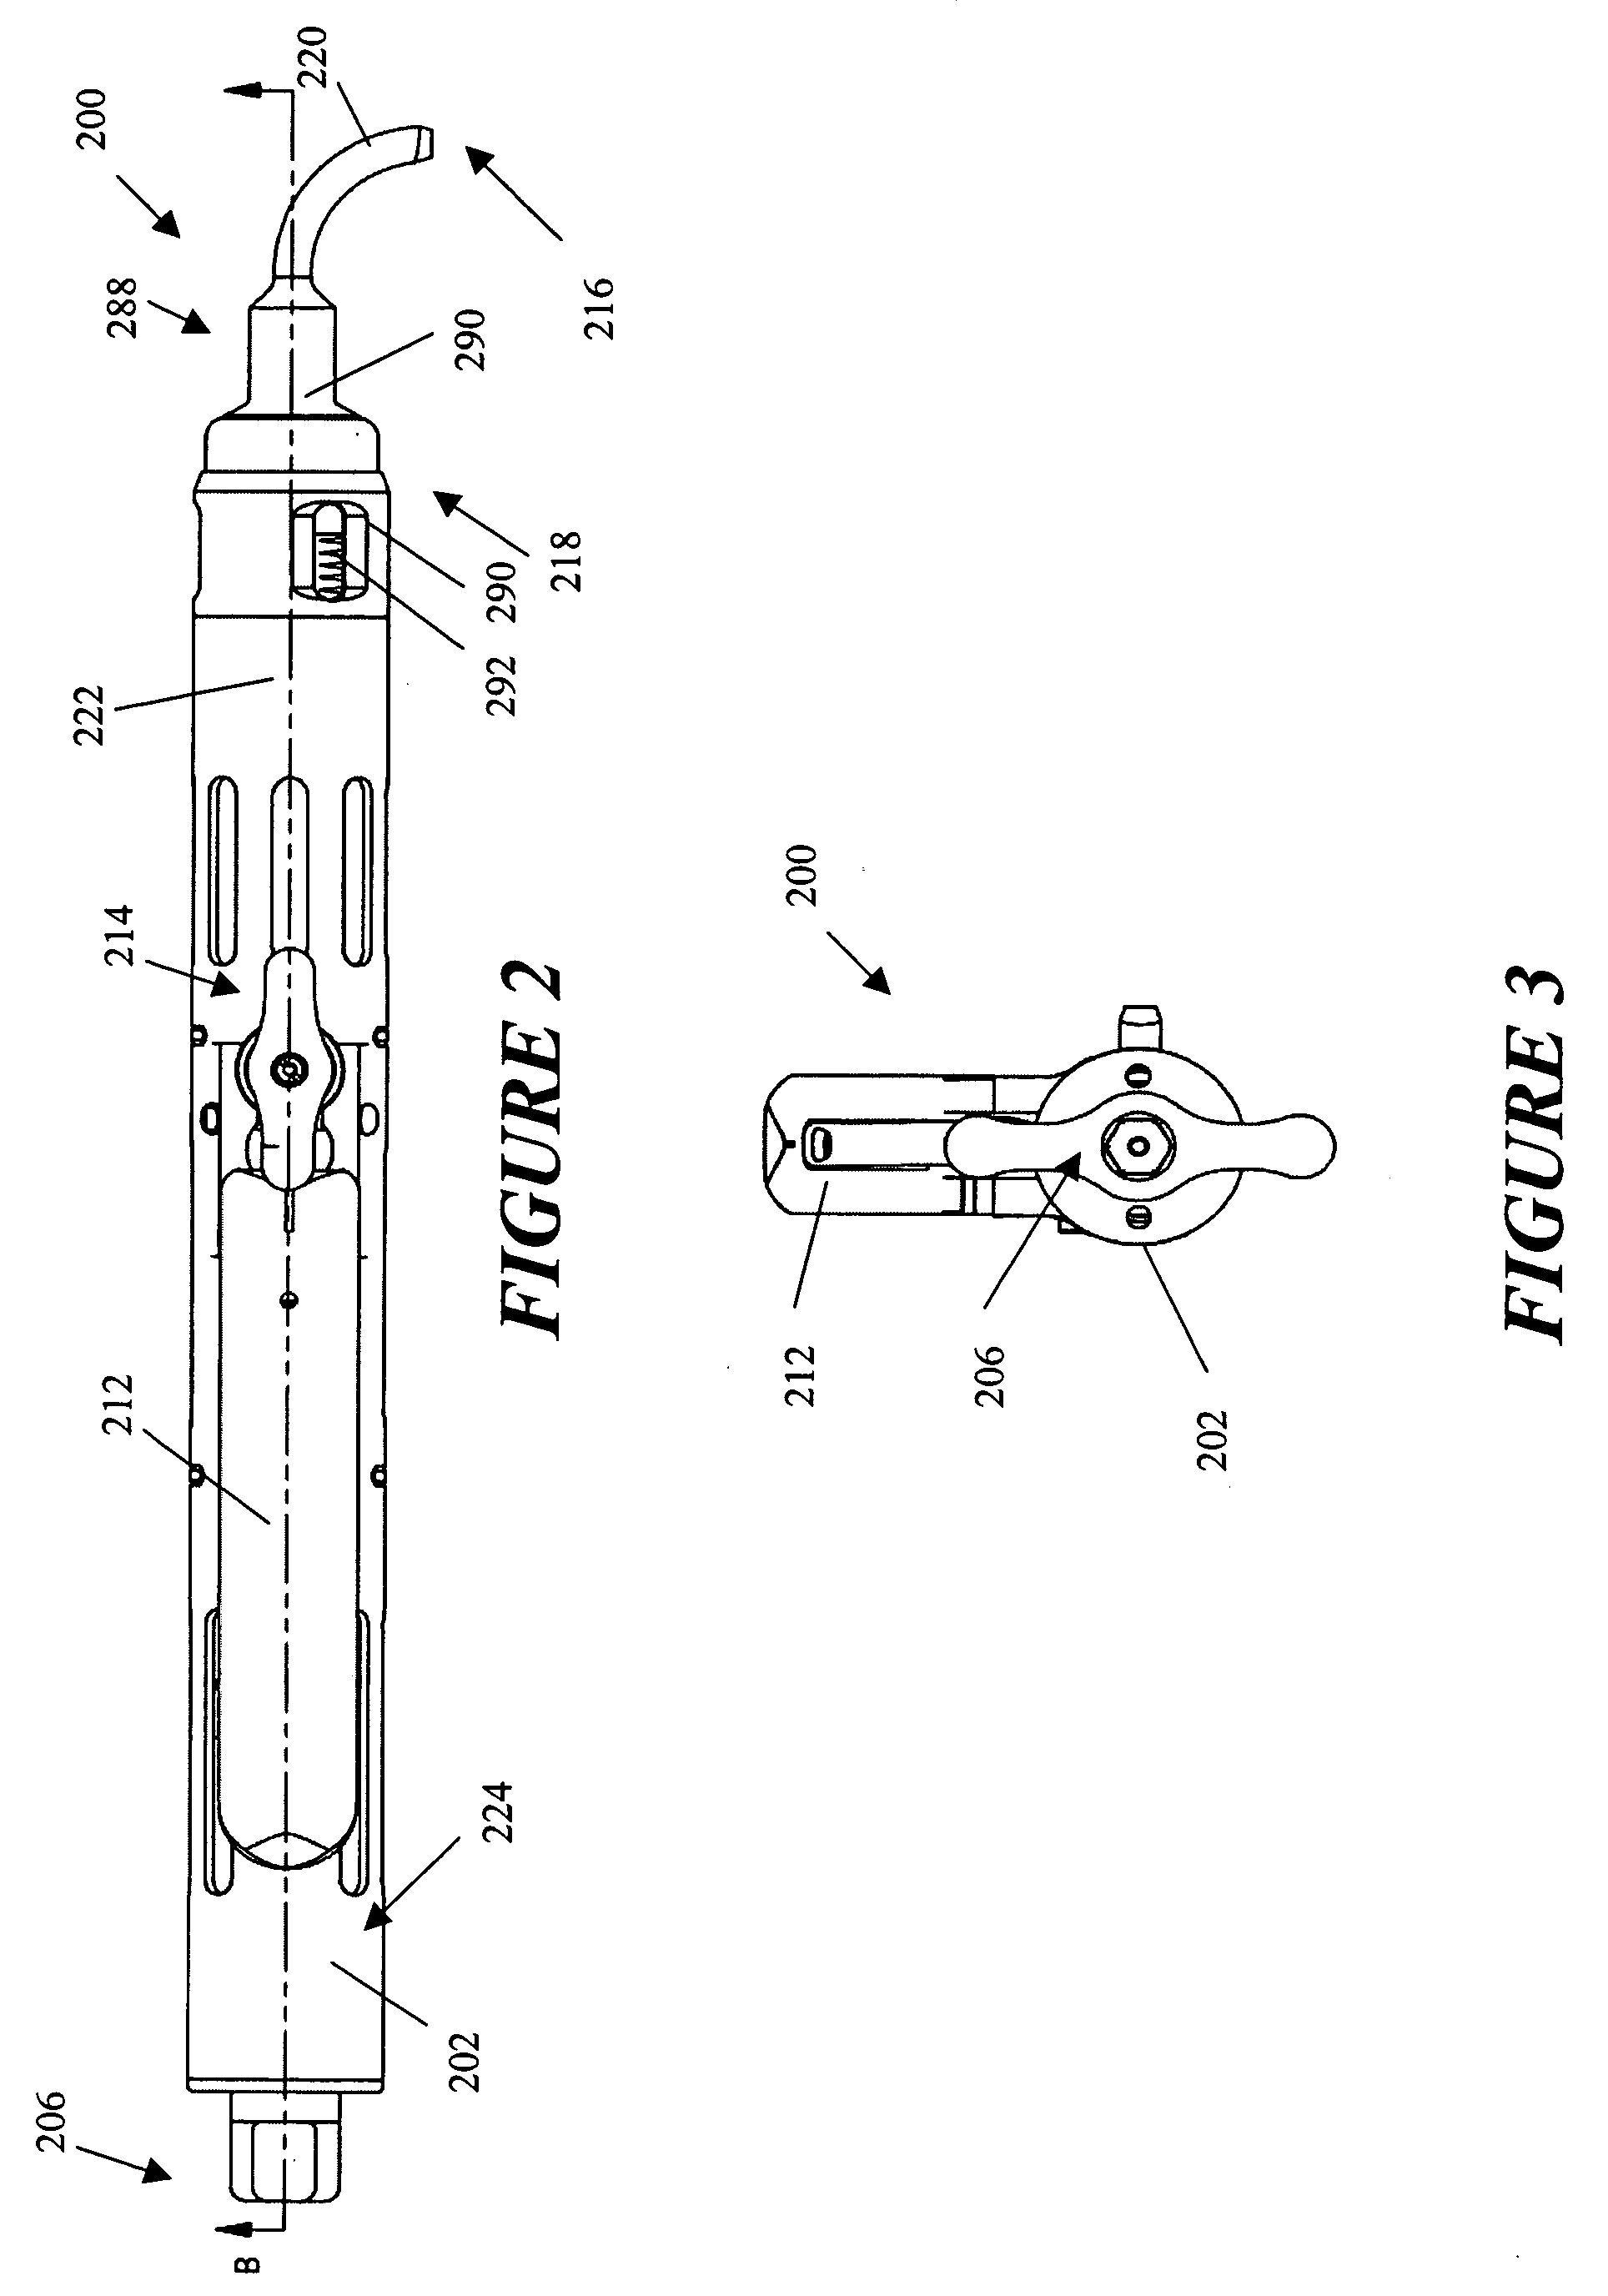 Systems, methods, and apparatuses for tensioning an orthopedic surgical cable